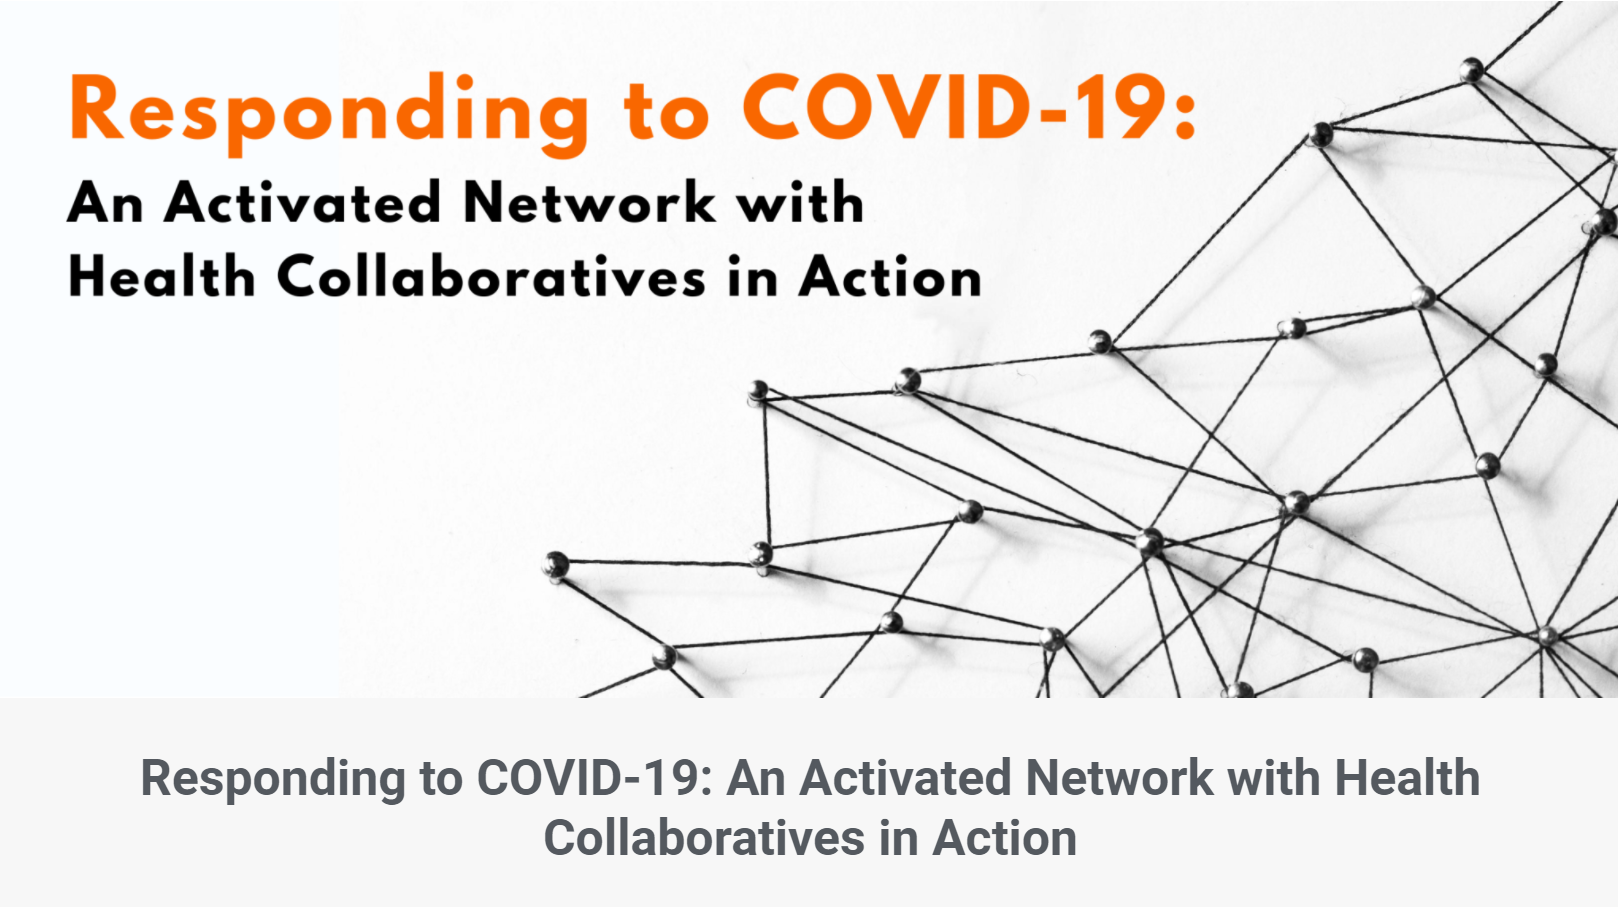 Responding to COVID-19: An Activated Network with Health Collaboratives in Action